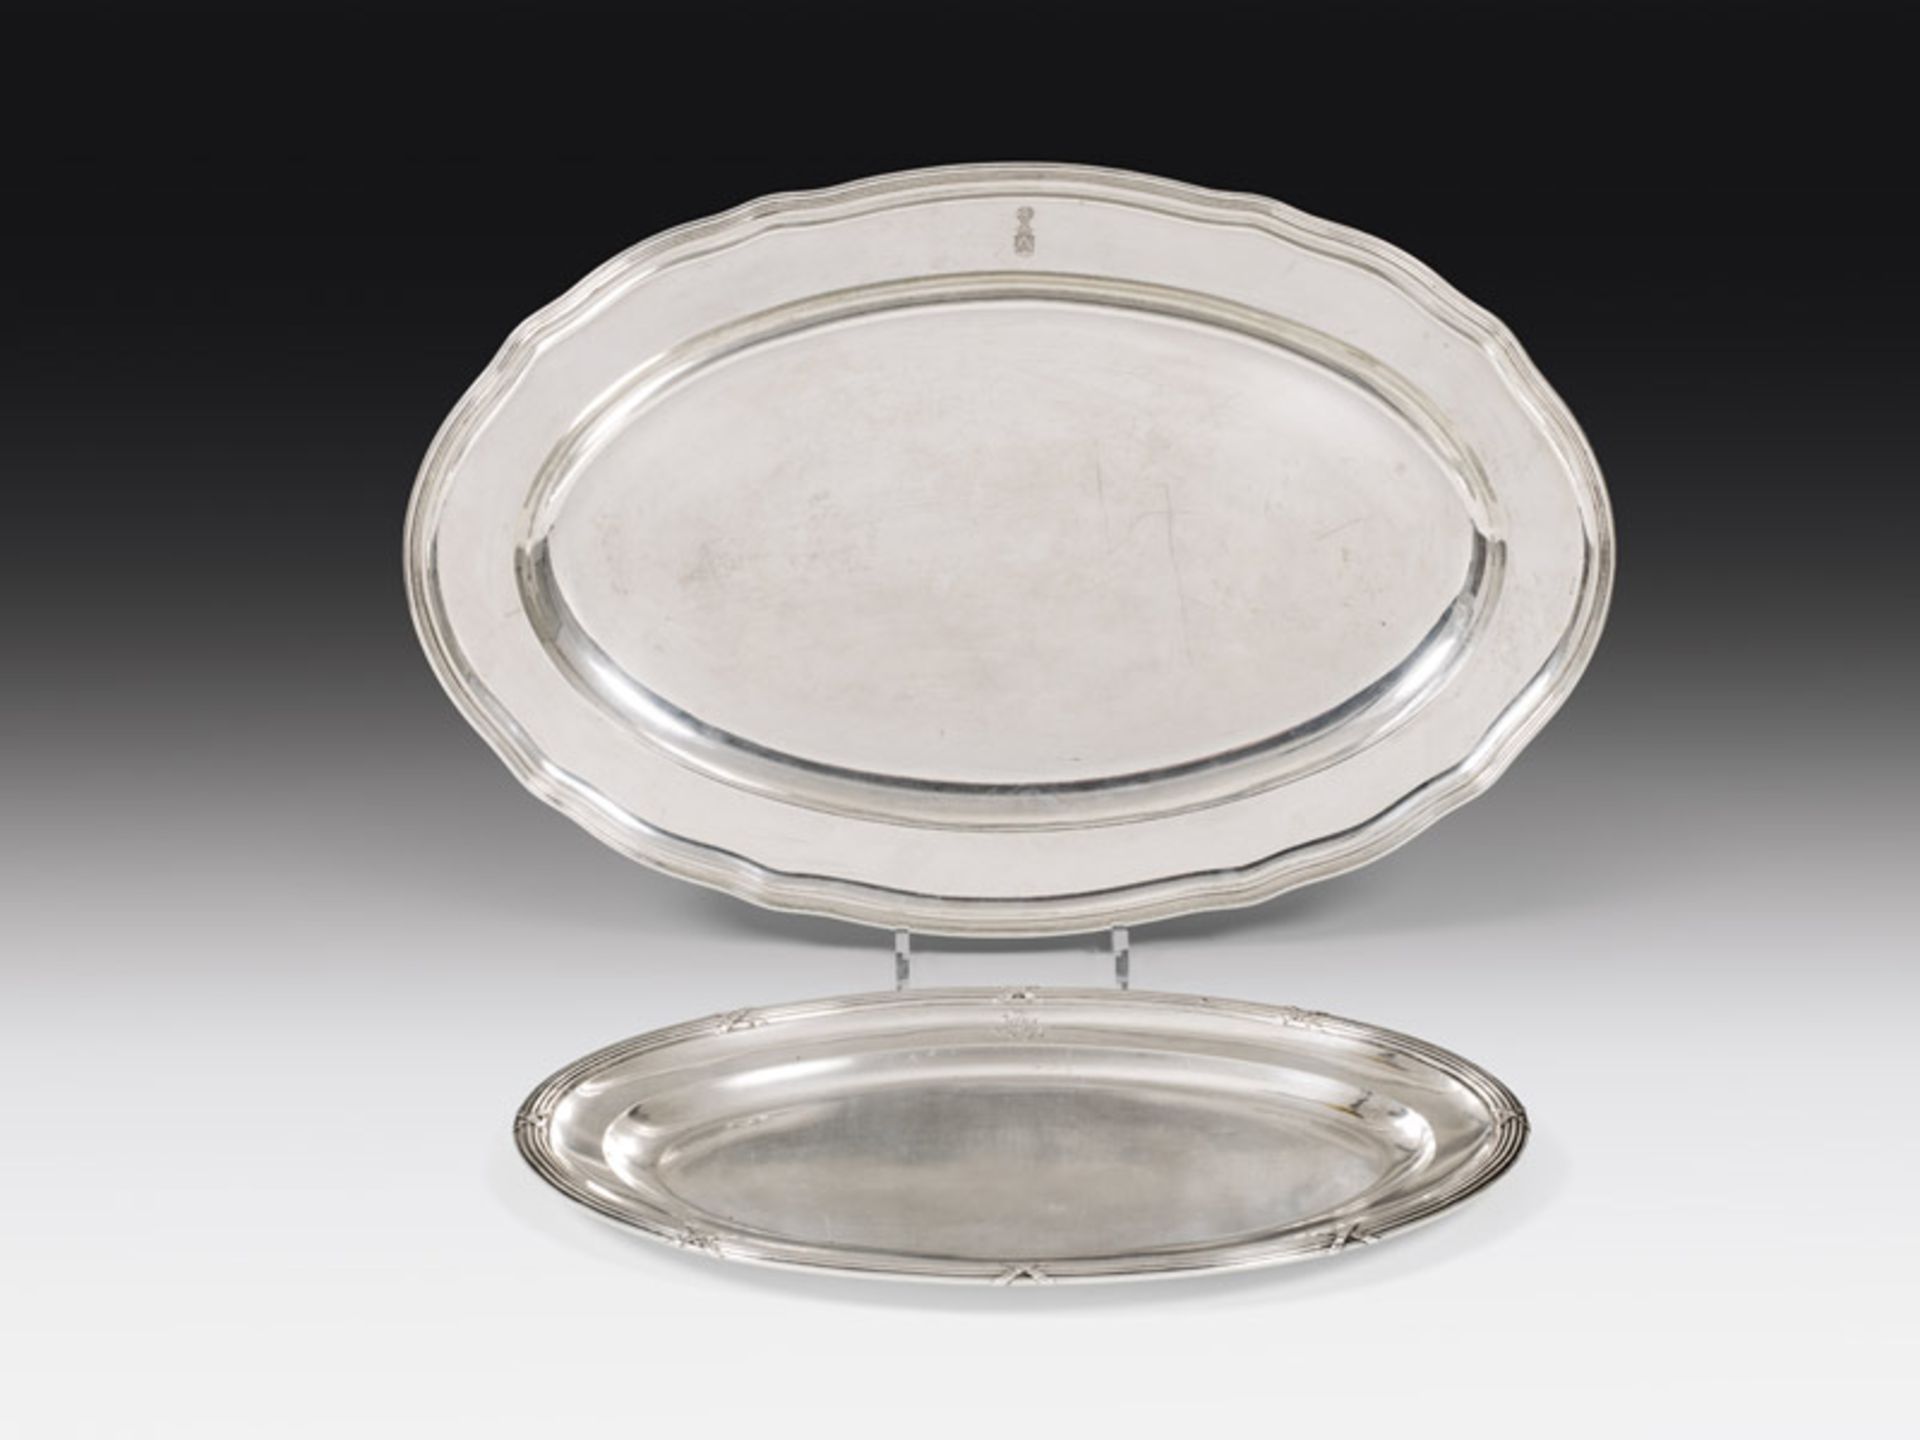 2 Plates, France/Germany, 19th/20th century